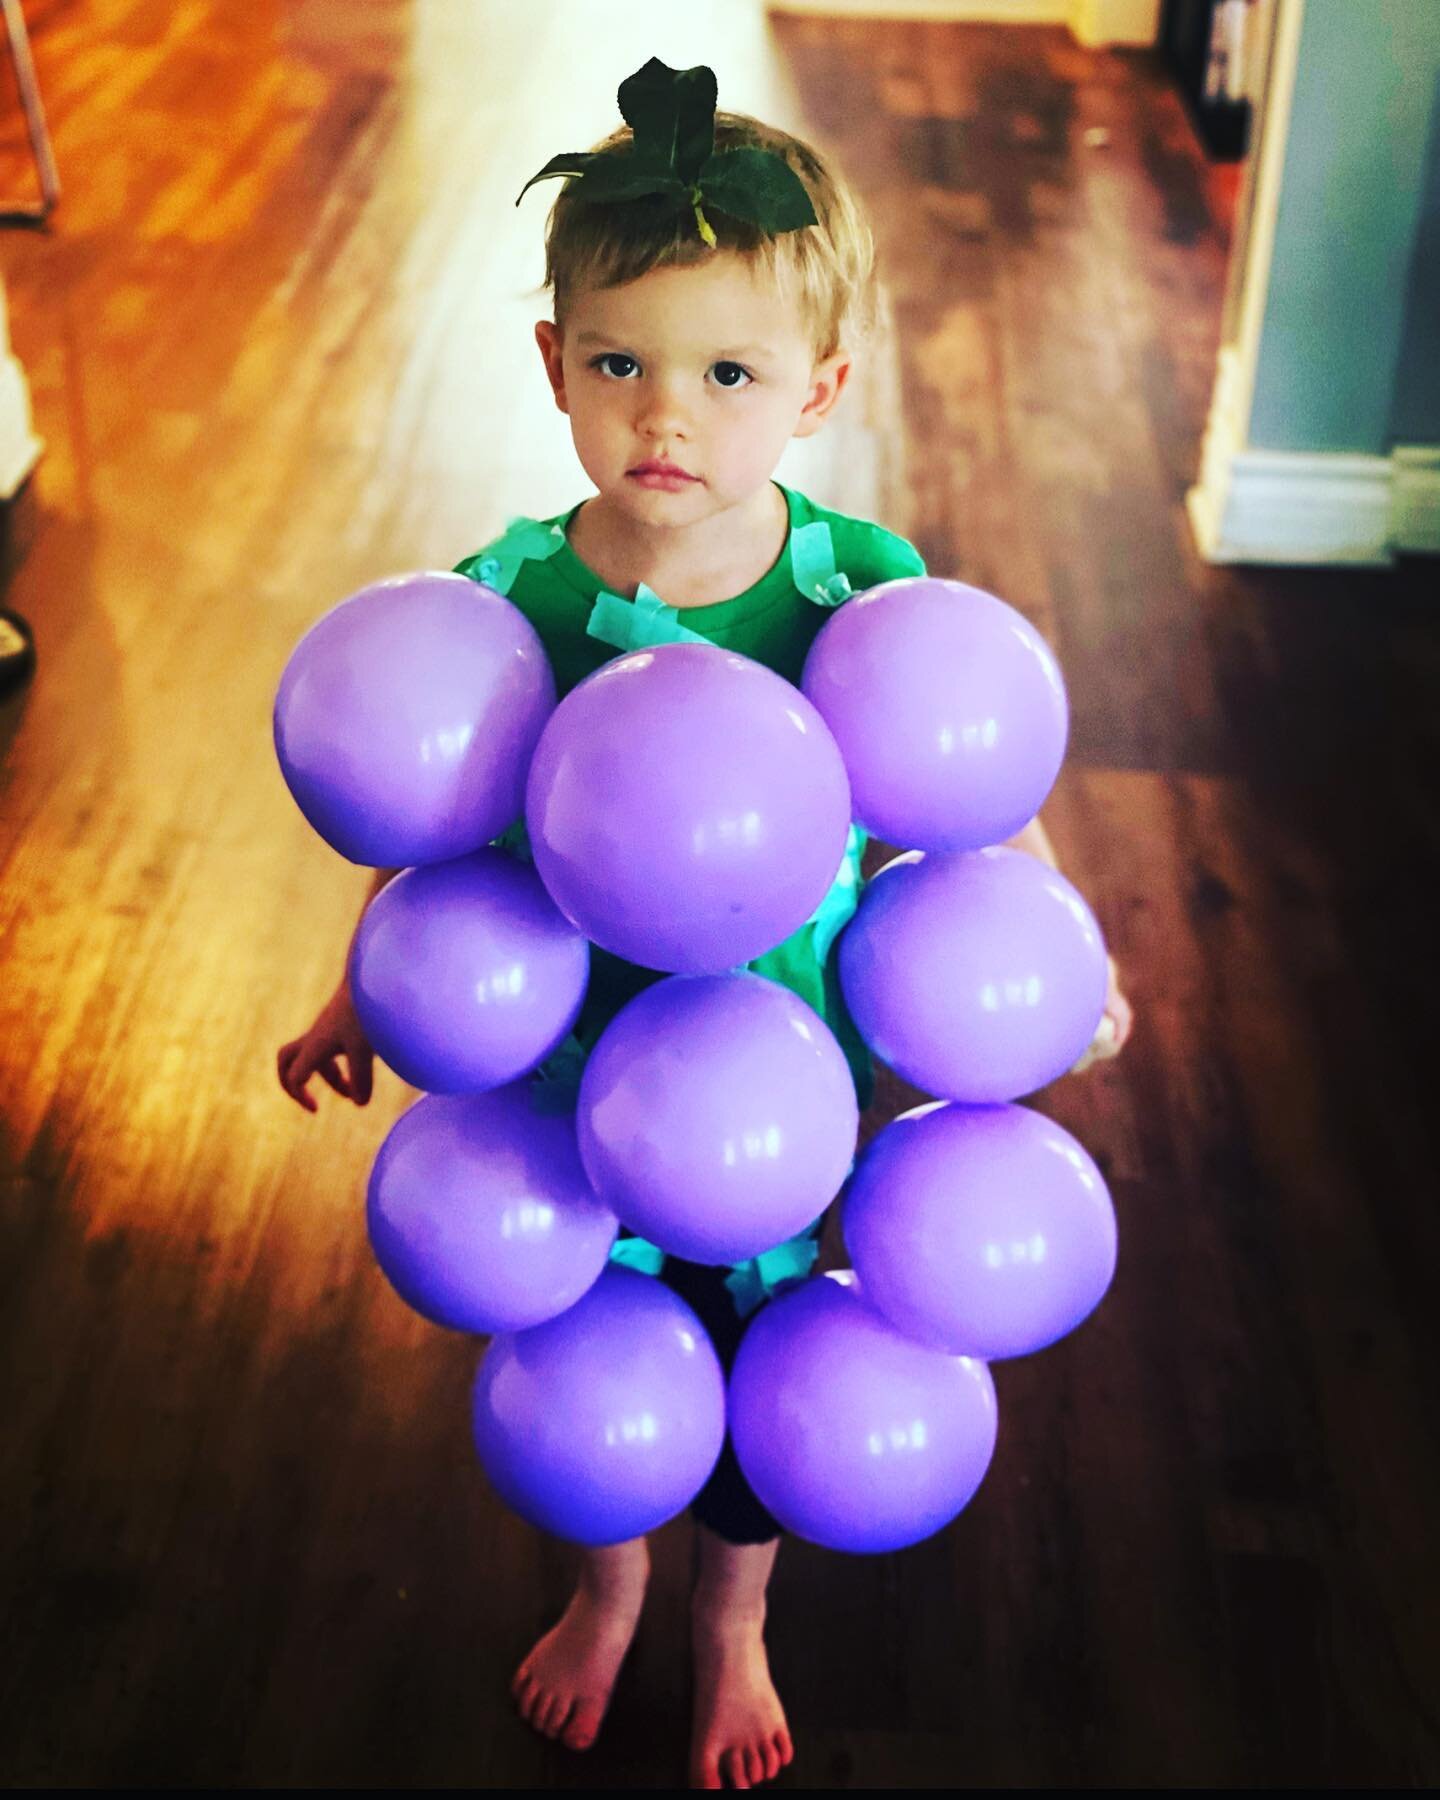 Rowan requested this! Lasted five minutes 🍇